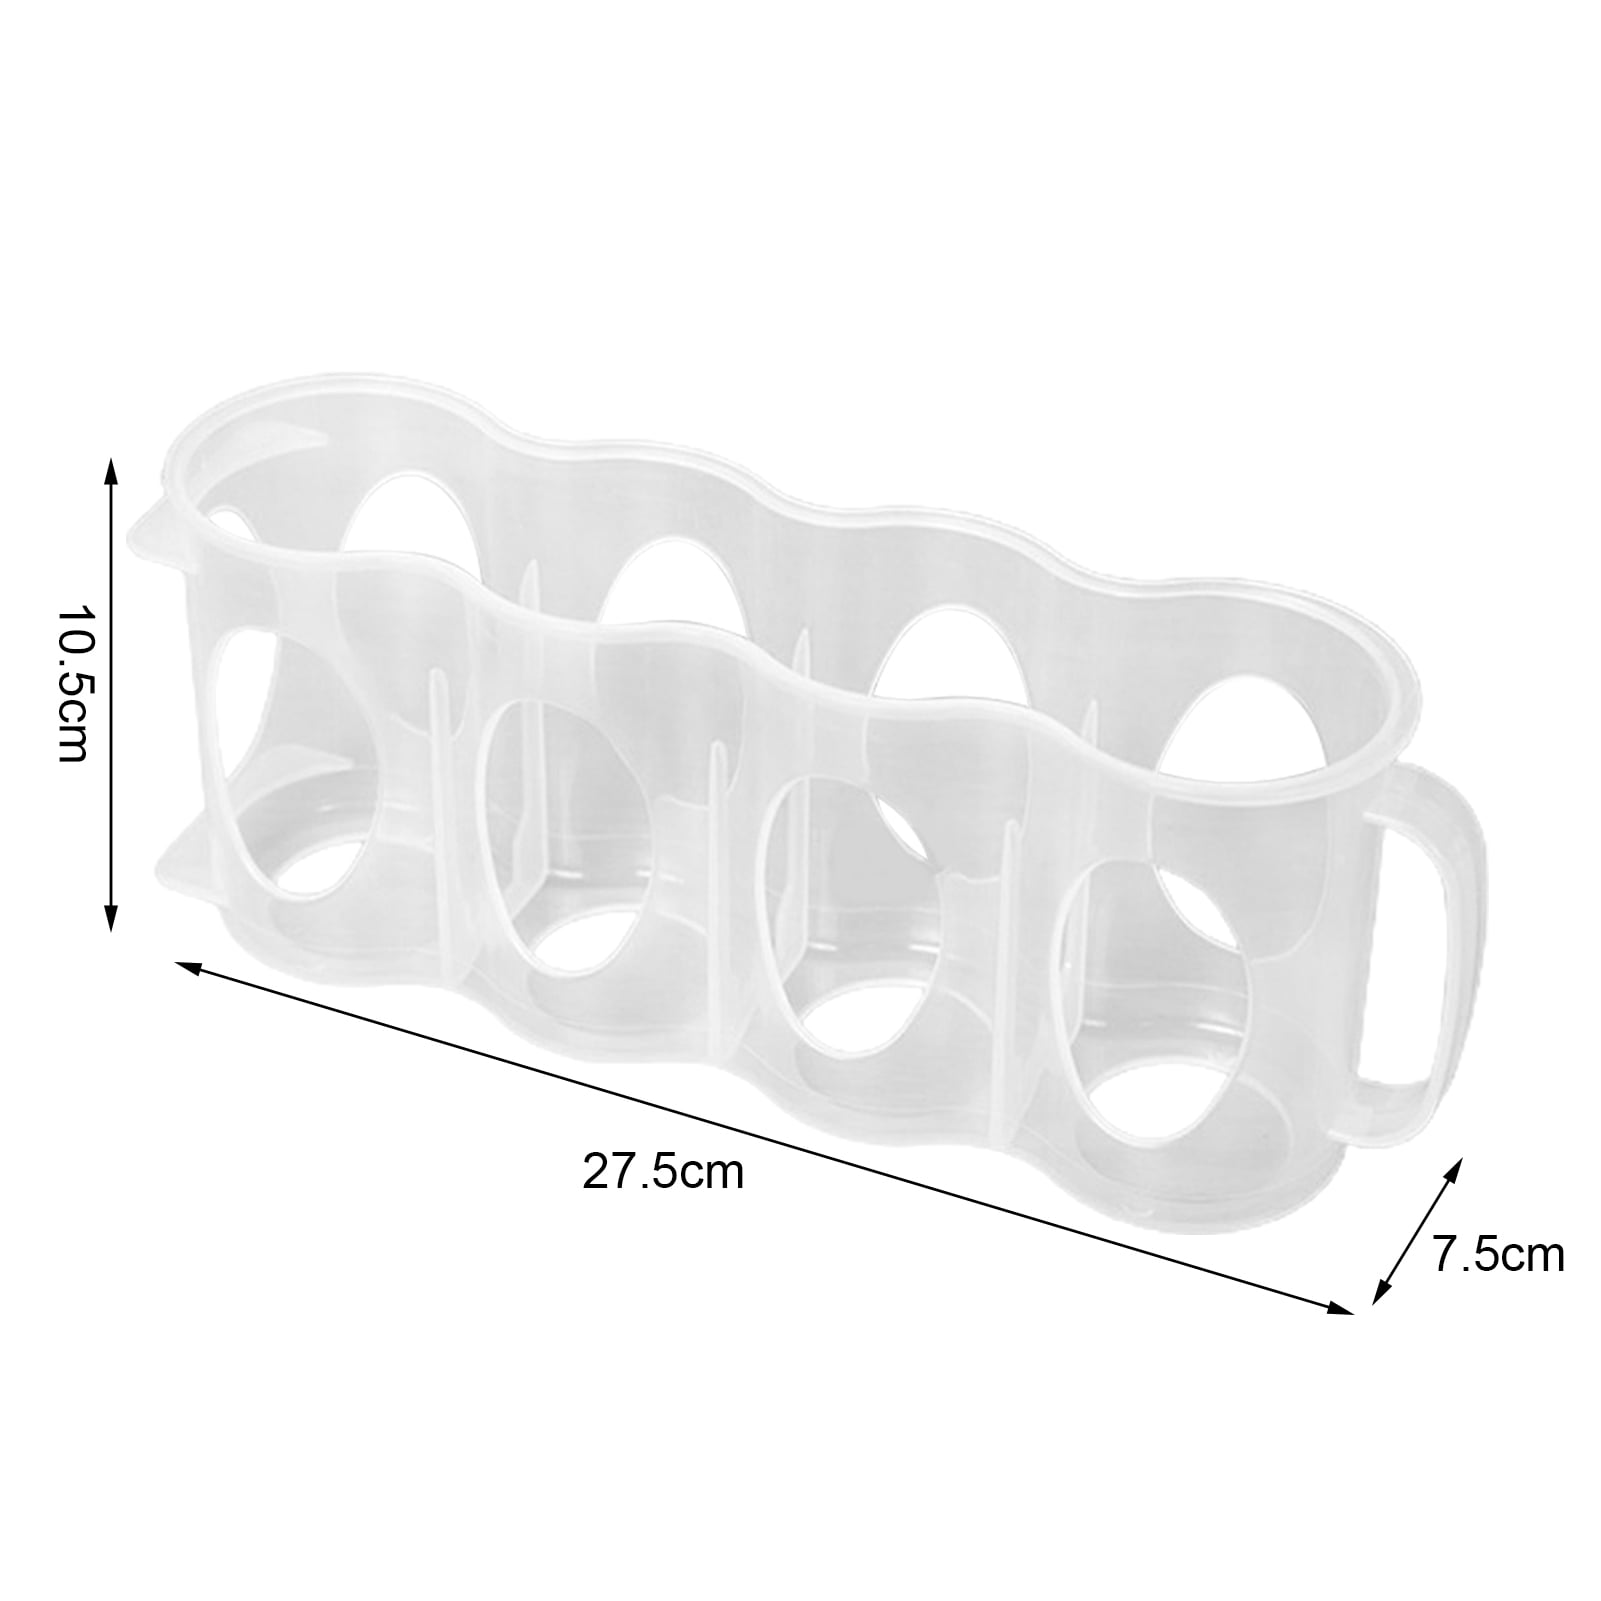 OJDXDY 3Pack Portable Soda Can Organizer for Refrigerator 4 Section Fridge  Organizer Bins with Handle Clear Plastic Freezer Drink Beverage Holder